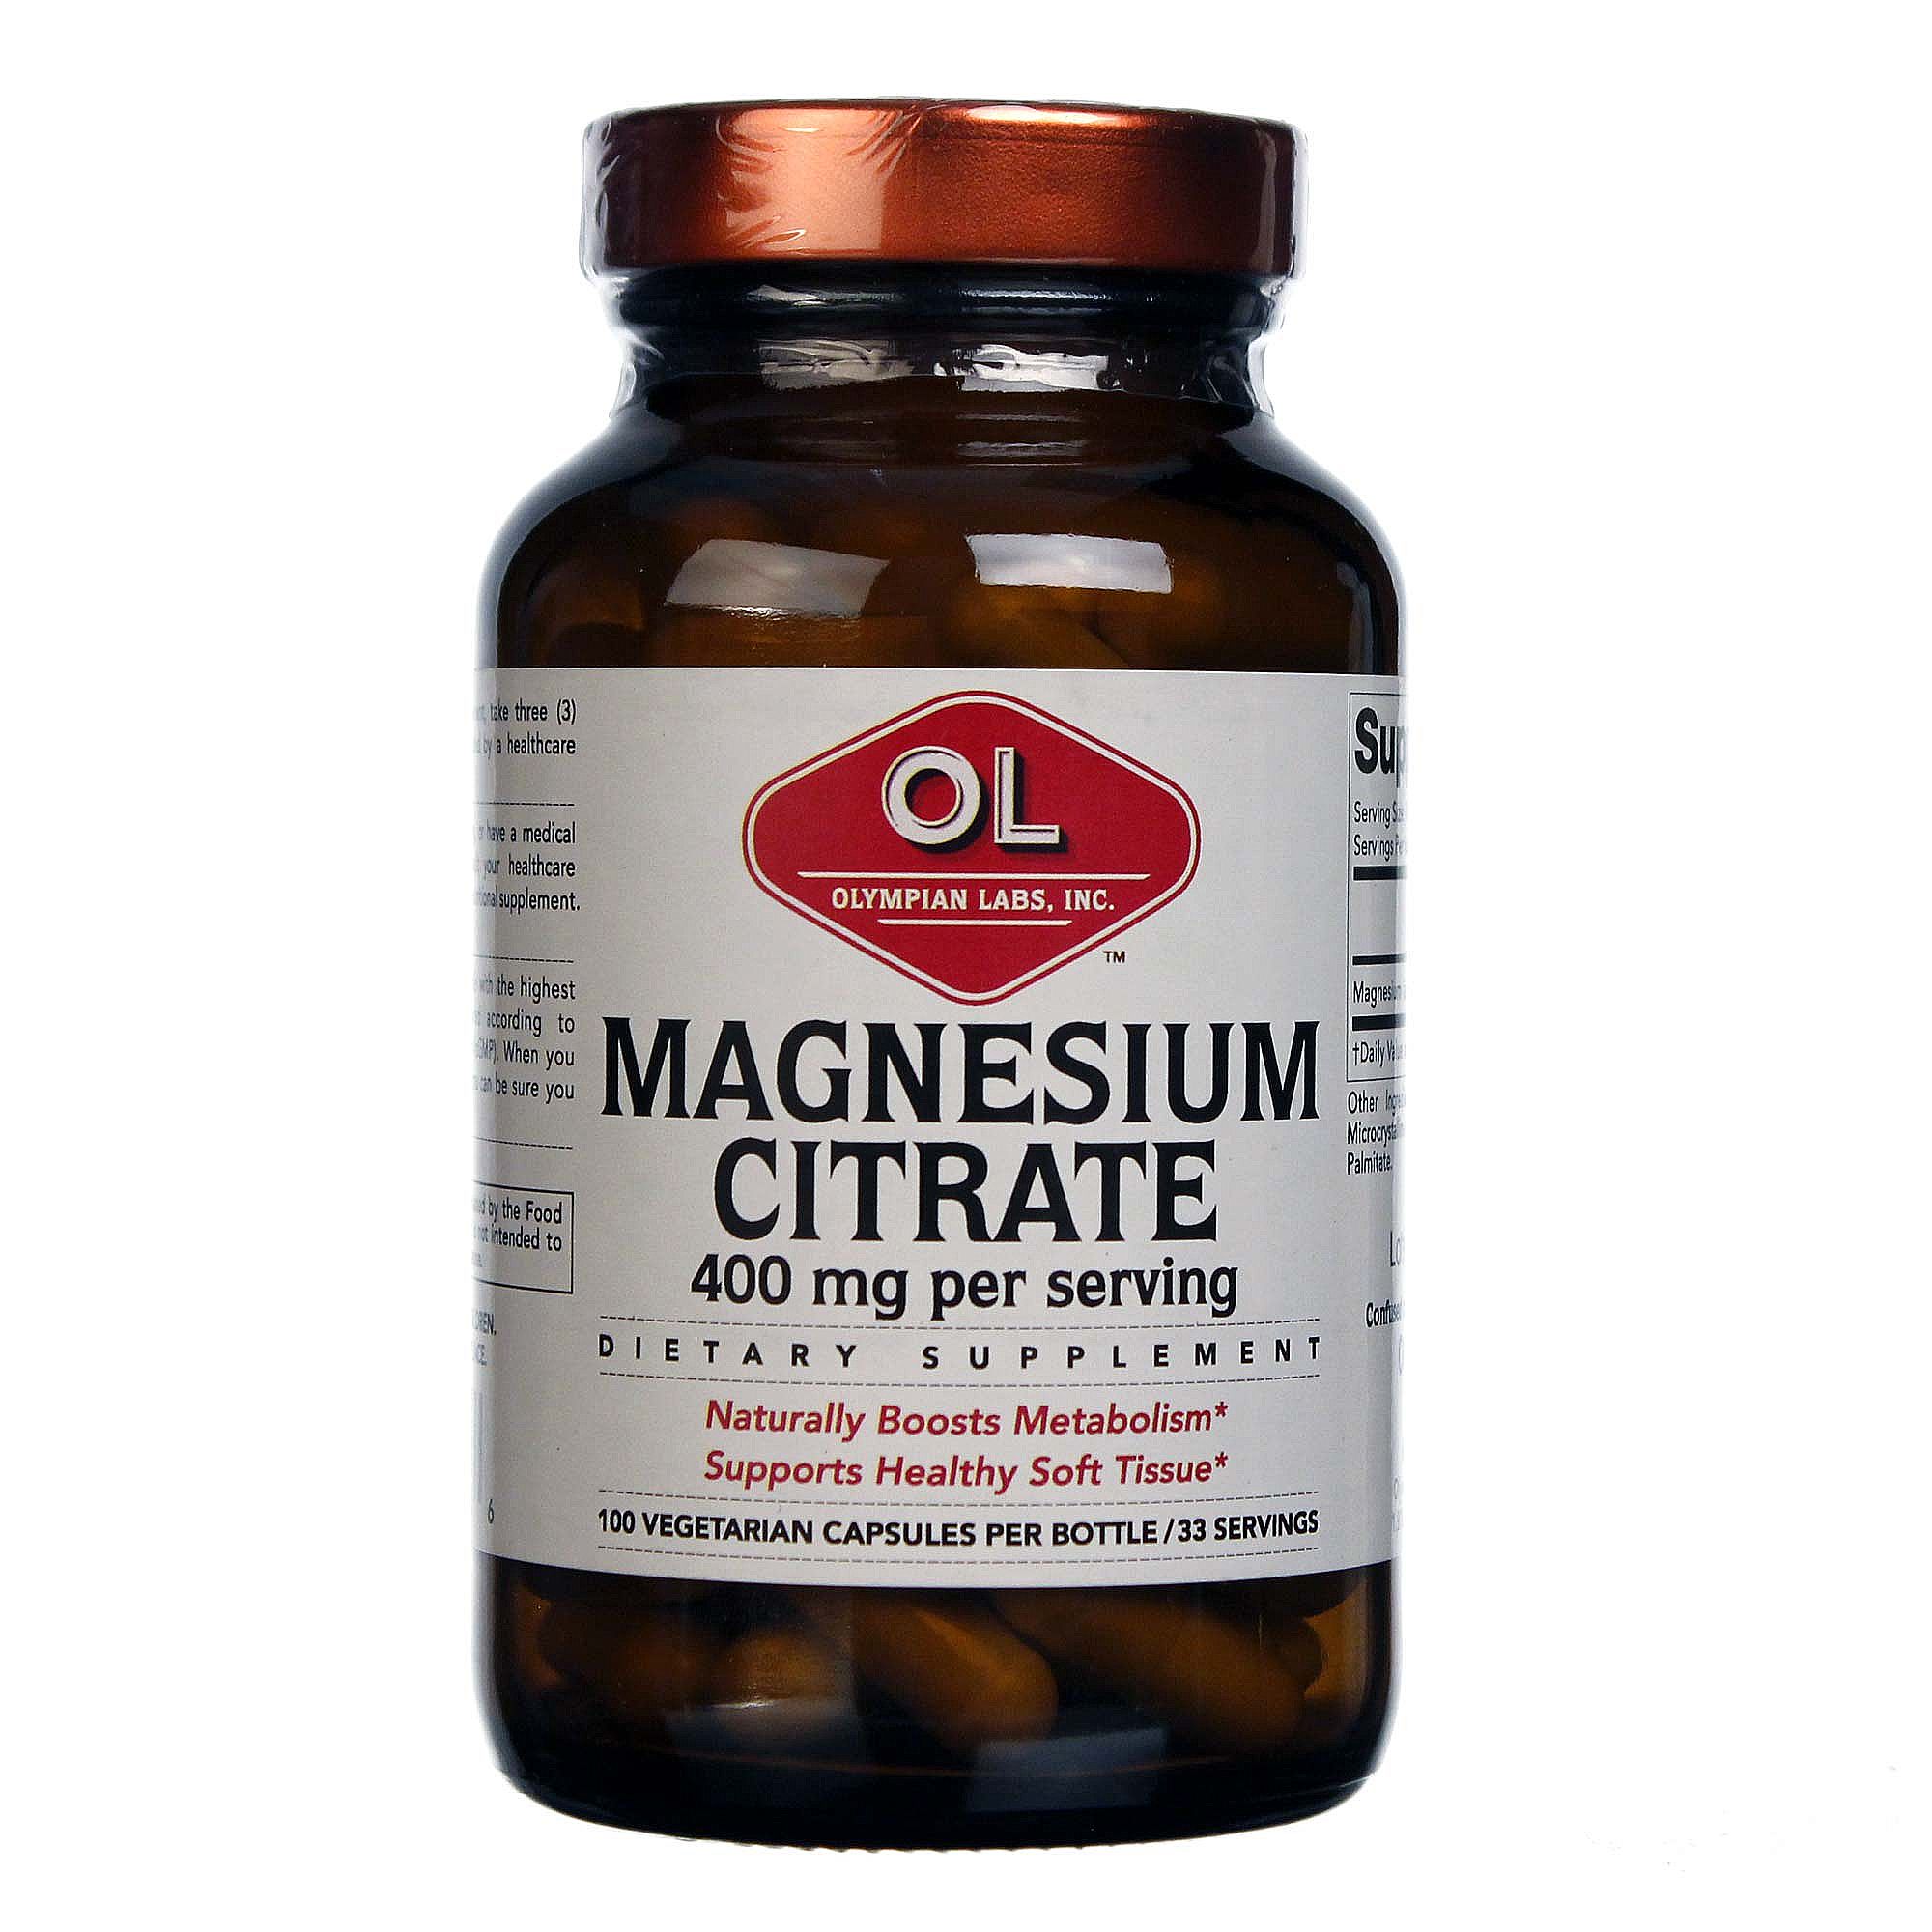 Magnesium citrate dosage for constipation.